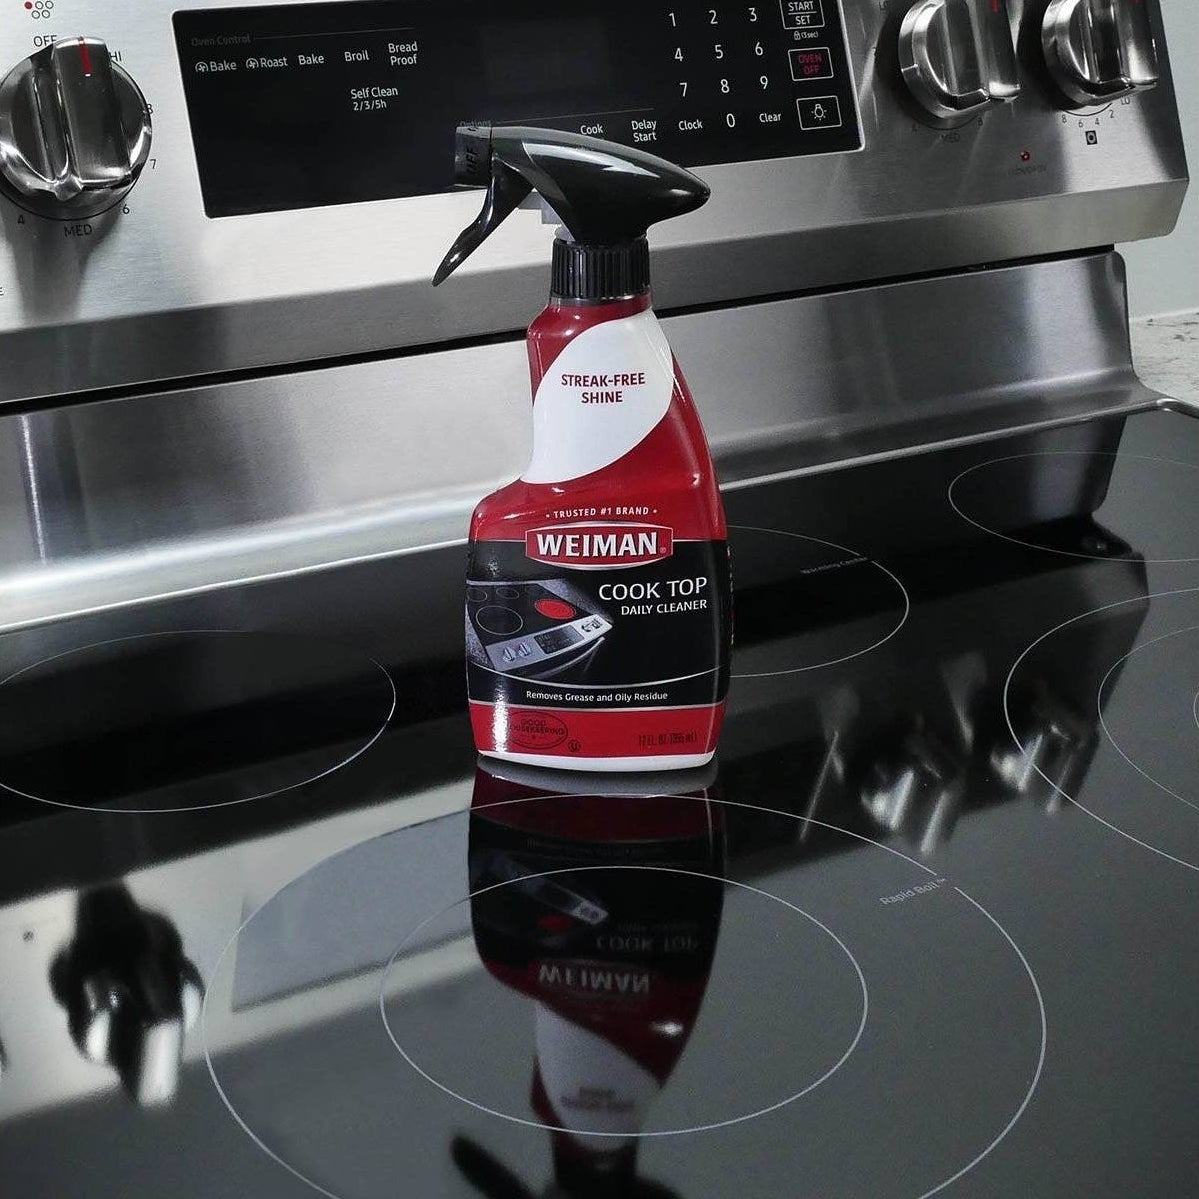 the red and black spray bottle of cleaner on a shiny glass cooktop